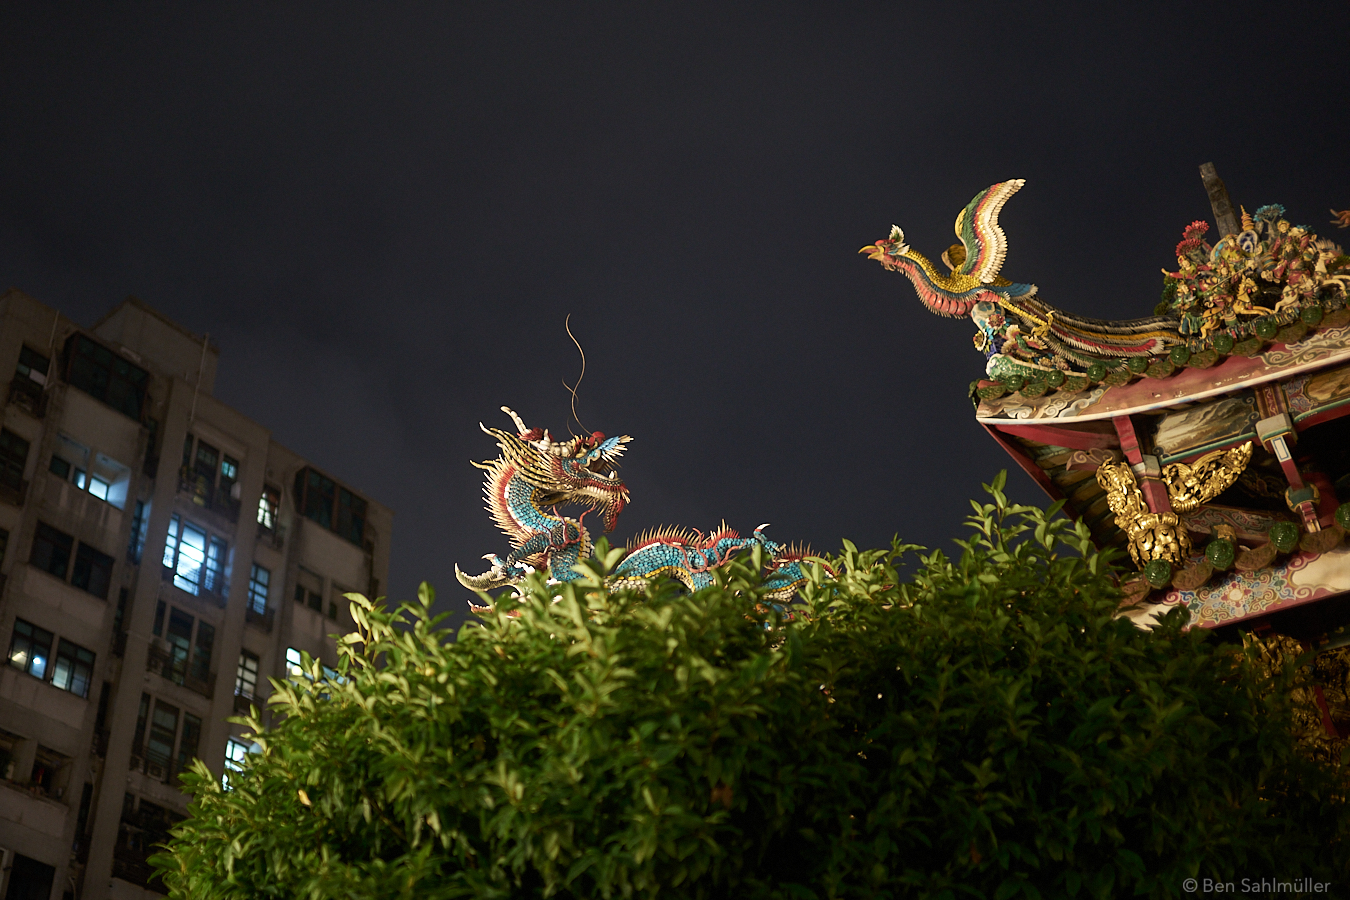 A dragon and a phoenix figure on a roof by night. The phoenix seems to take off while the dragon seems to growl at him. The warm light of the temple is contrasted by a cold glow from an apartment building in the back.